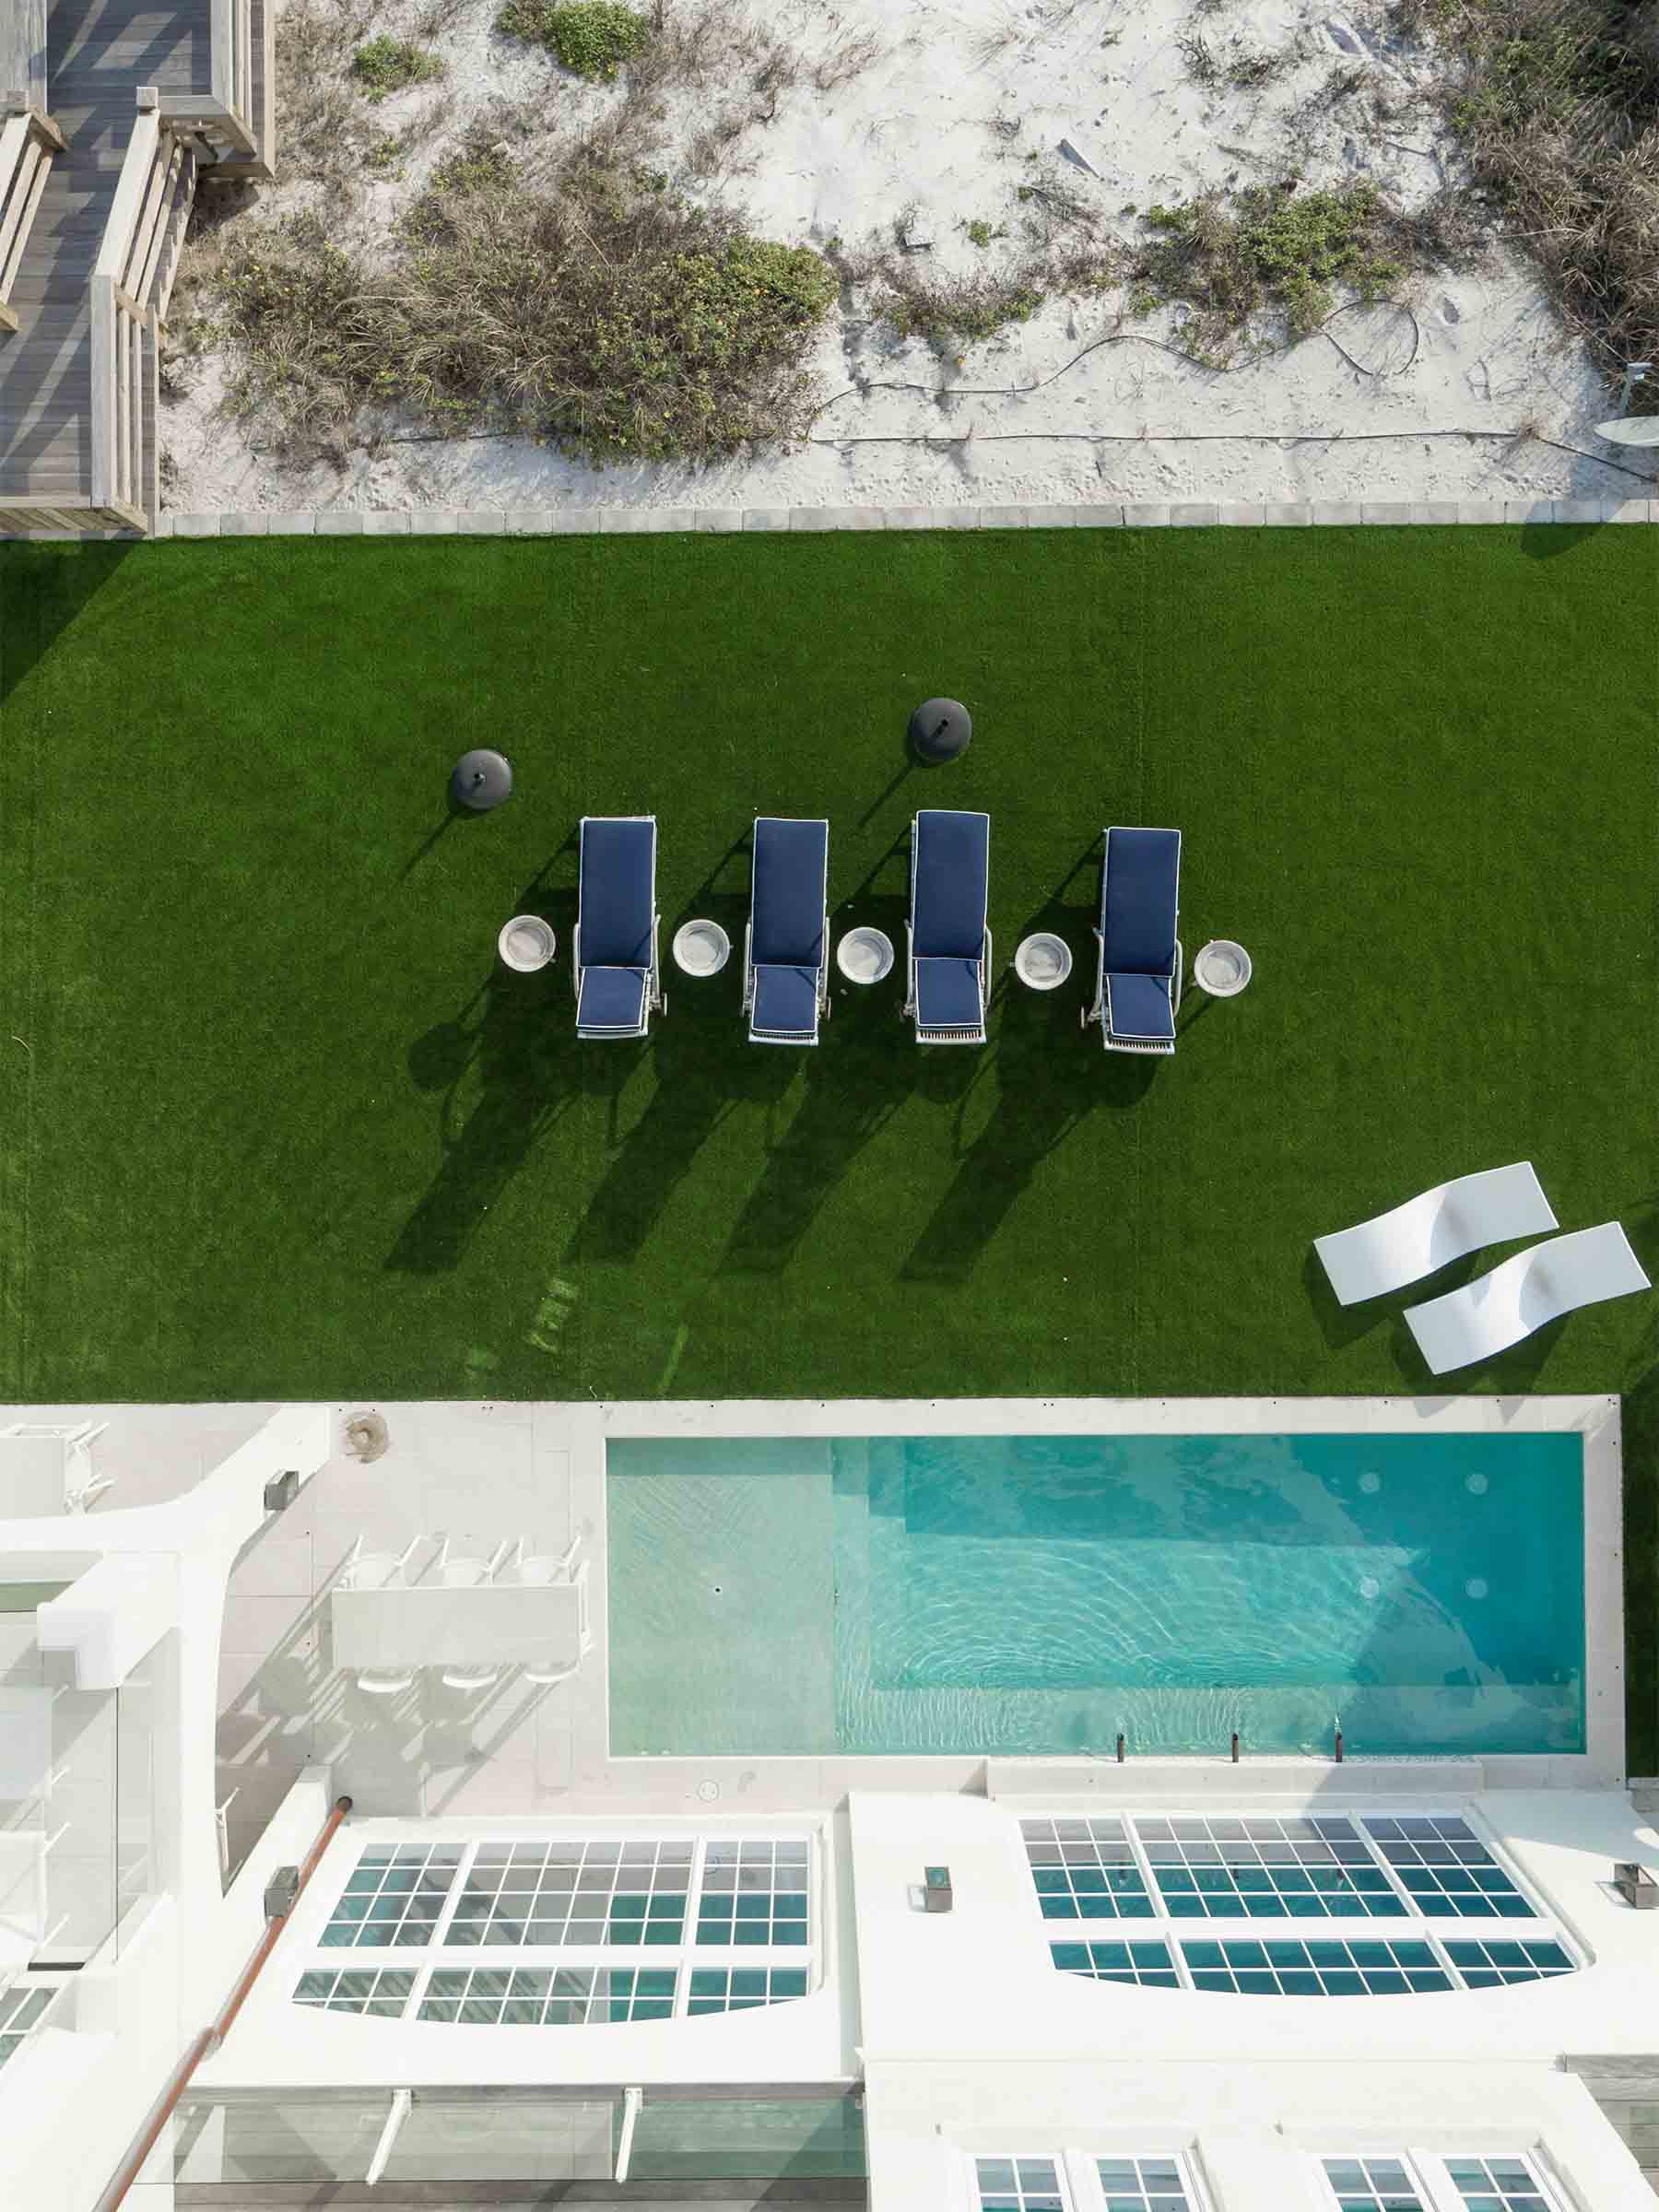 Bird's-eye view of the pool hardscape